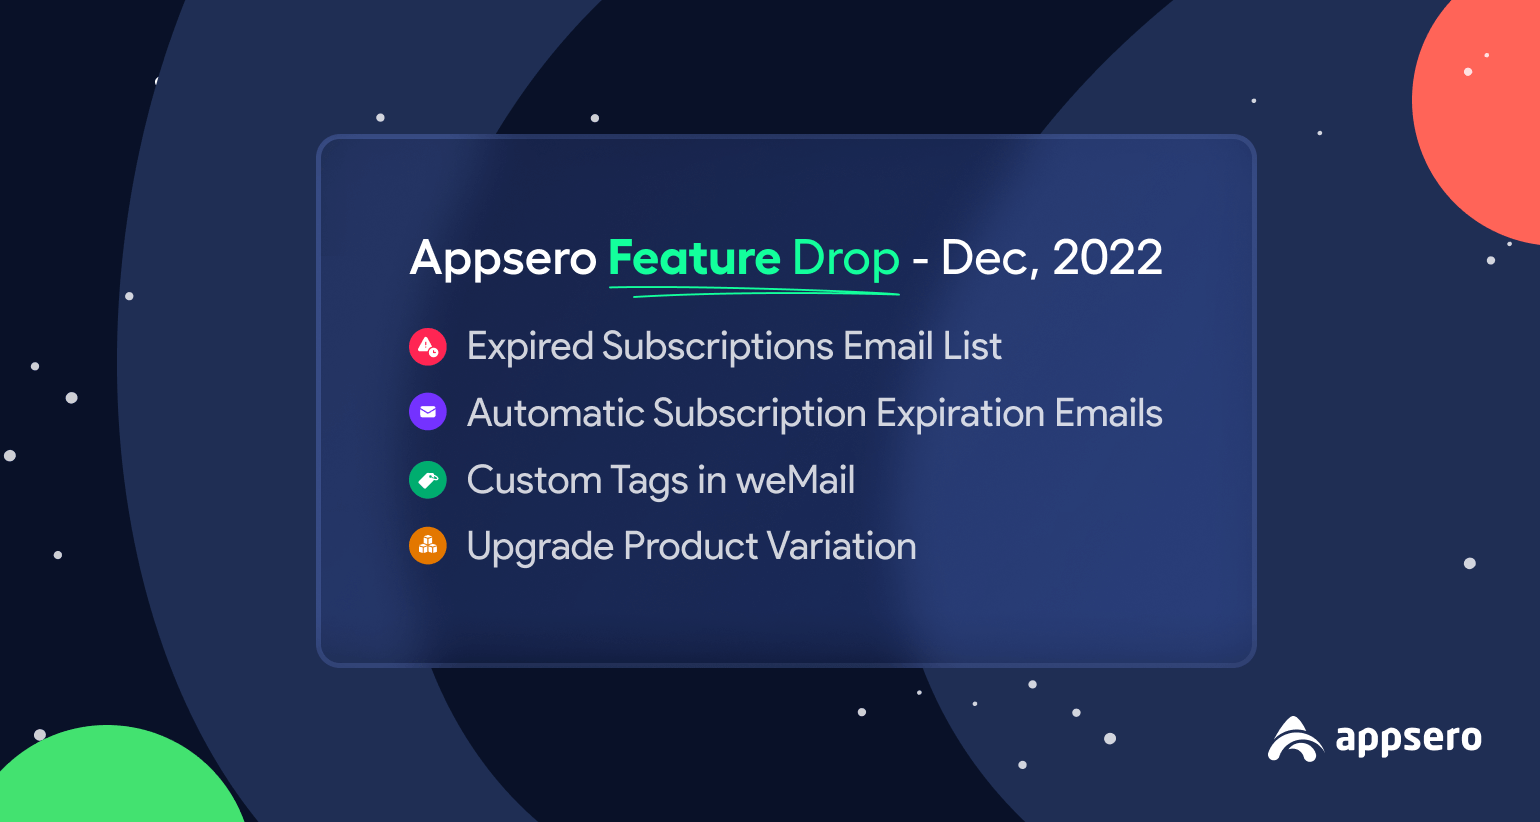 Feature Release 🎉: Automatic subscription expiration emails, custom tags in weMail, product variation upgrades, and more 2